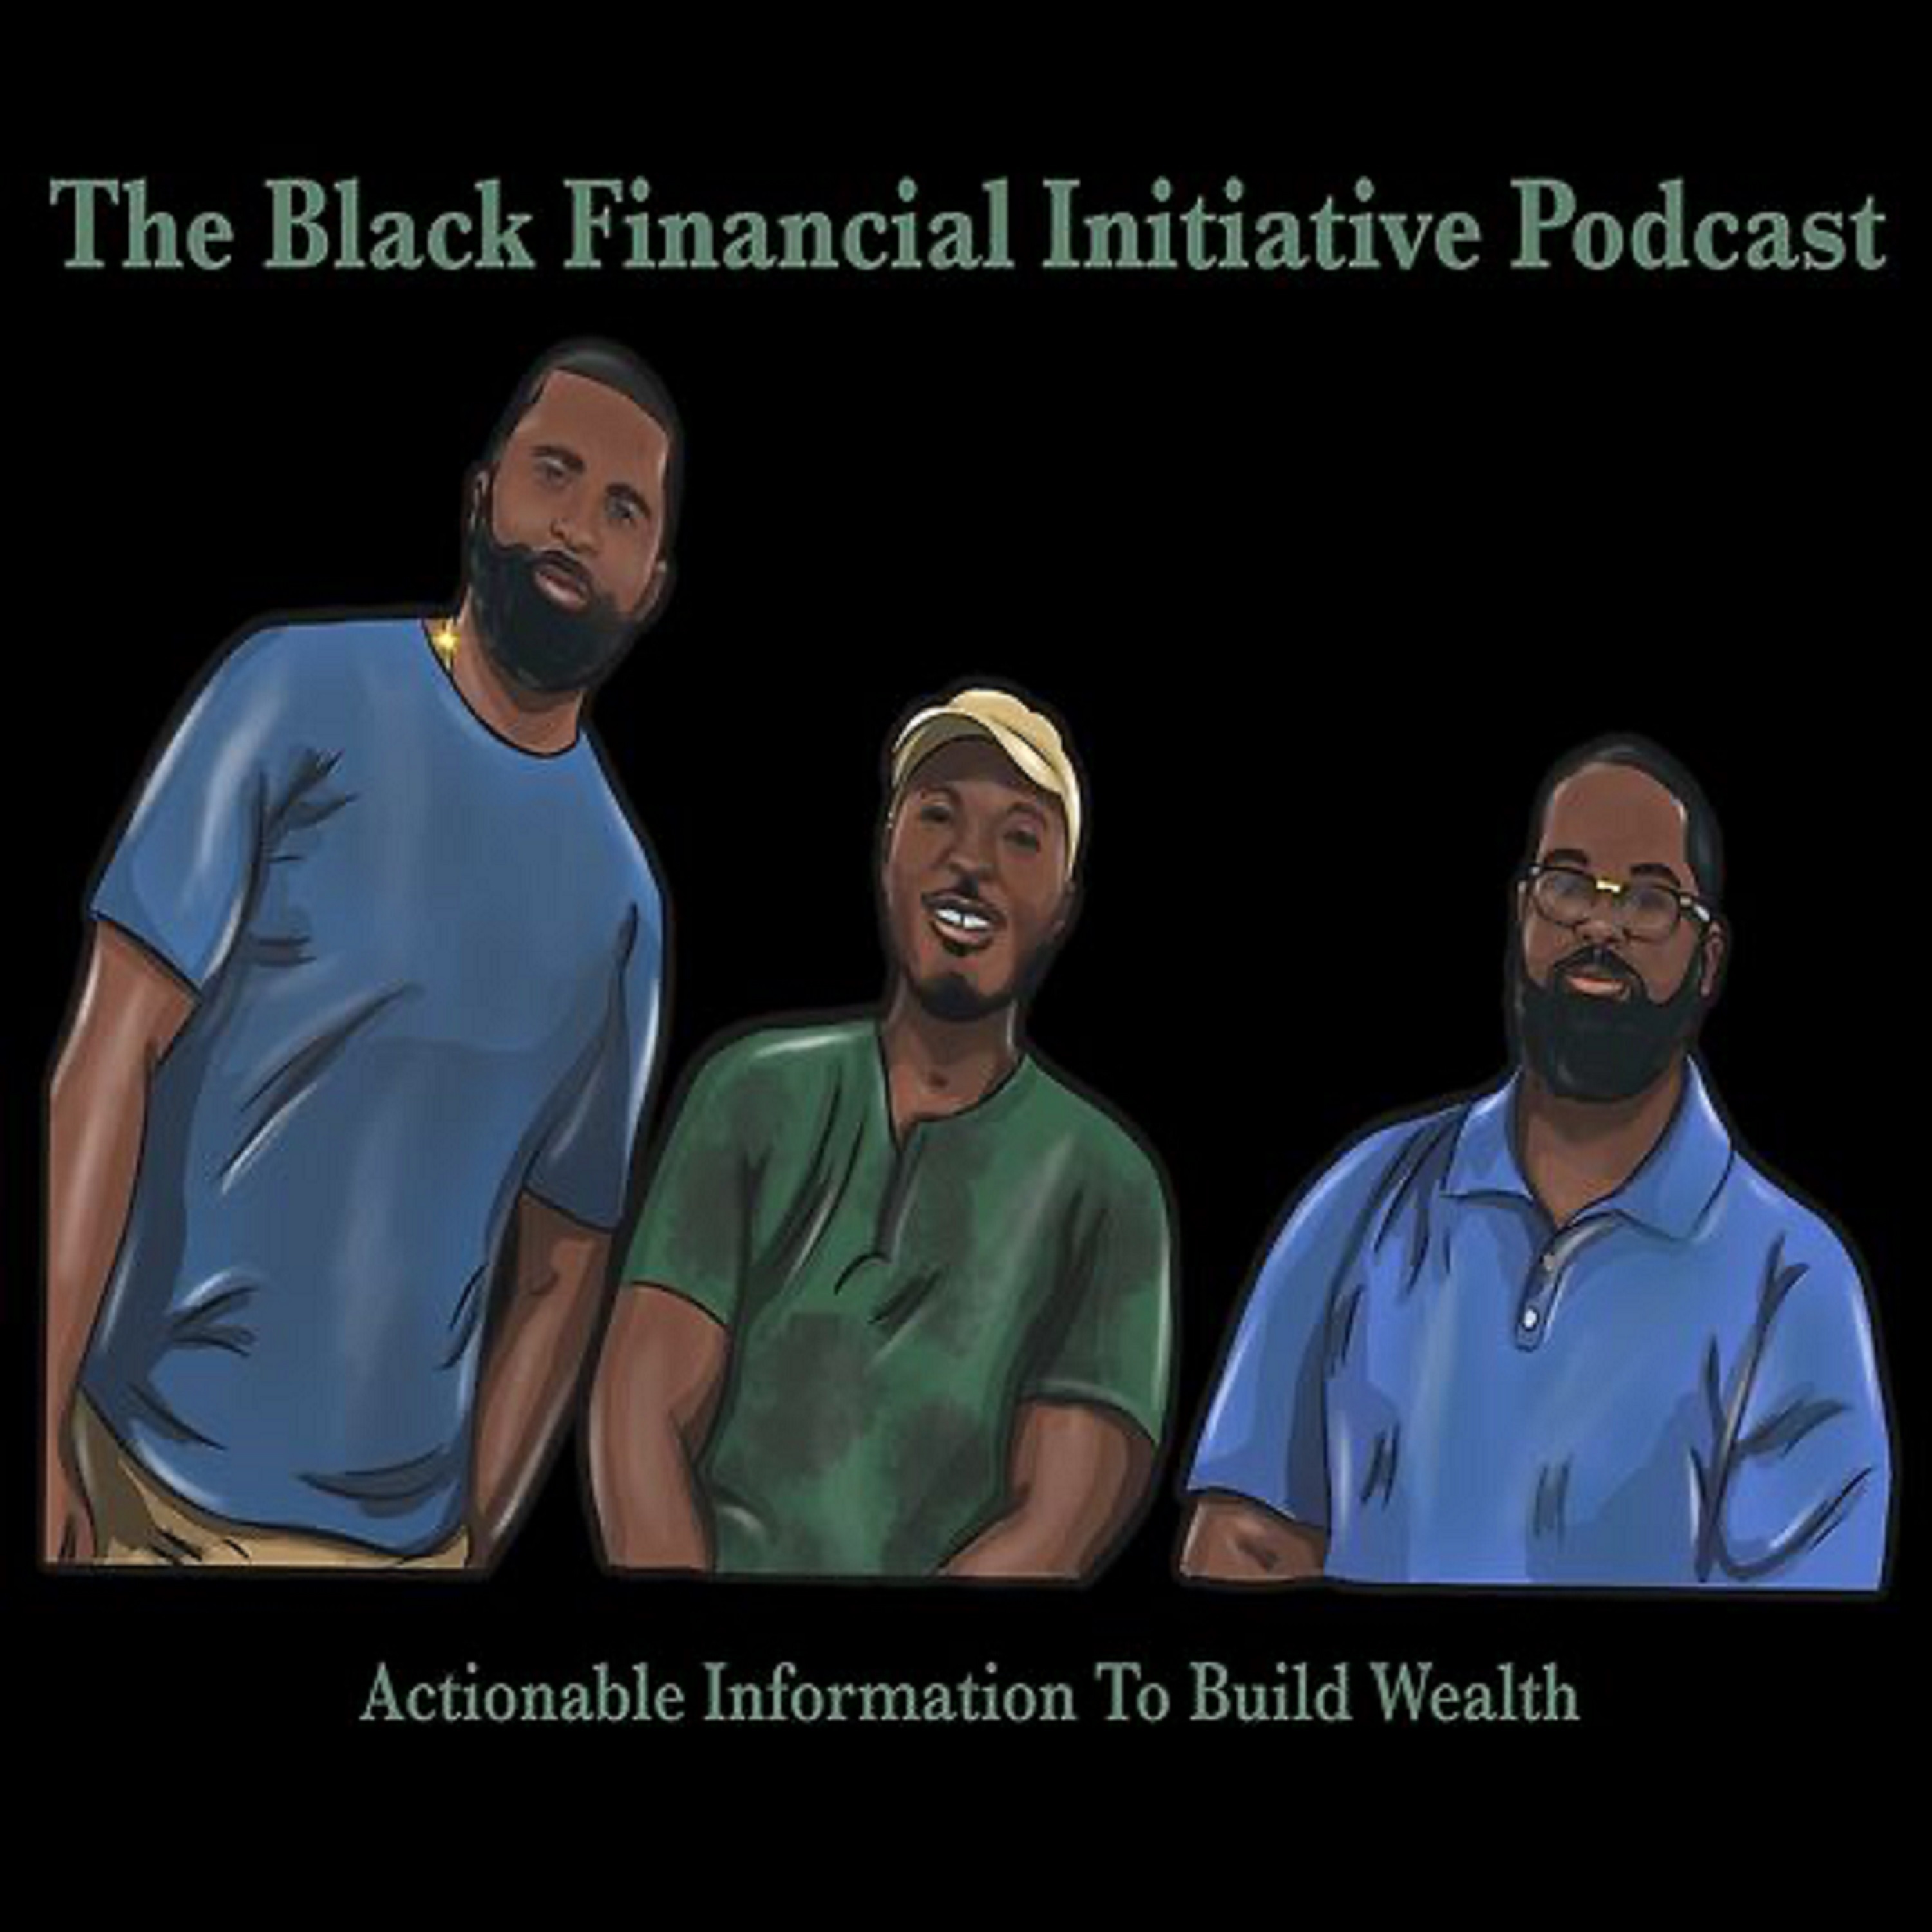 The Black Financial Initiative Podcast